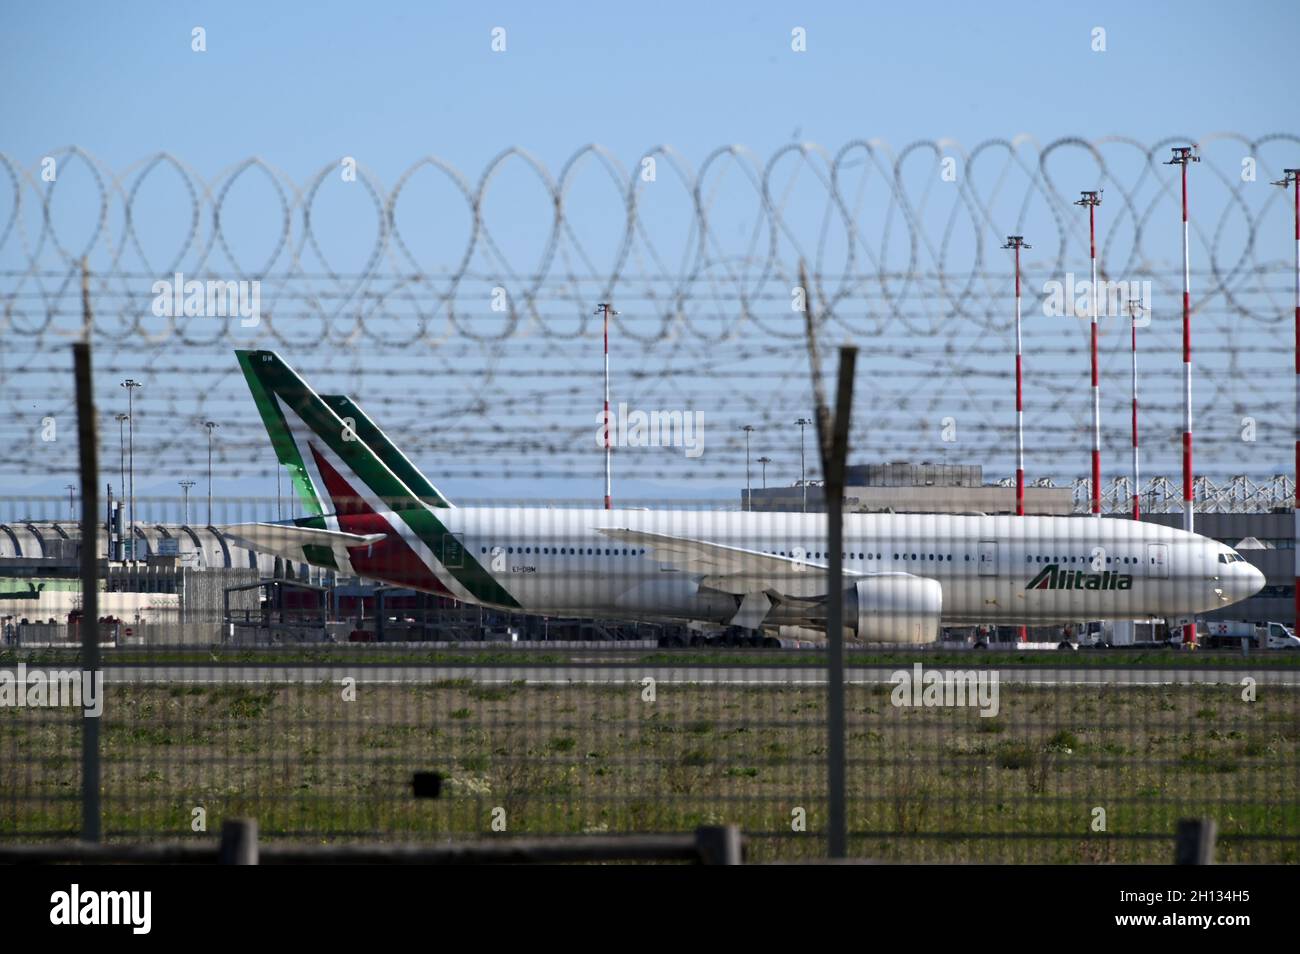 Rome, Italy. 15th Oct, 2021. An airplane of ITA (Italian Airline Transport) is sitting at the ramp of Rome's Fiumicimo airport in Rome, Italy, on Oct. 15, 2021. TO GO WITH "Feature: Italy's flagship airline Alitalia operates last flight" Credit: Alberto Lingria/Xinhua/Alamy Live News Stock Photo